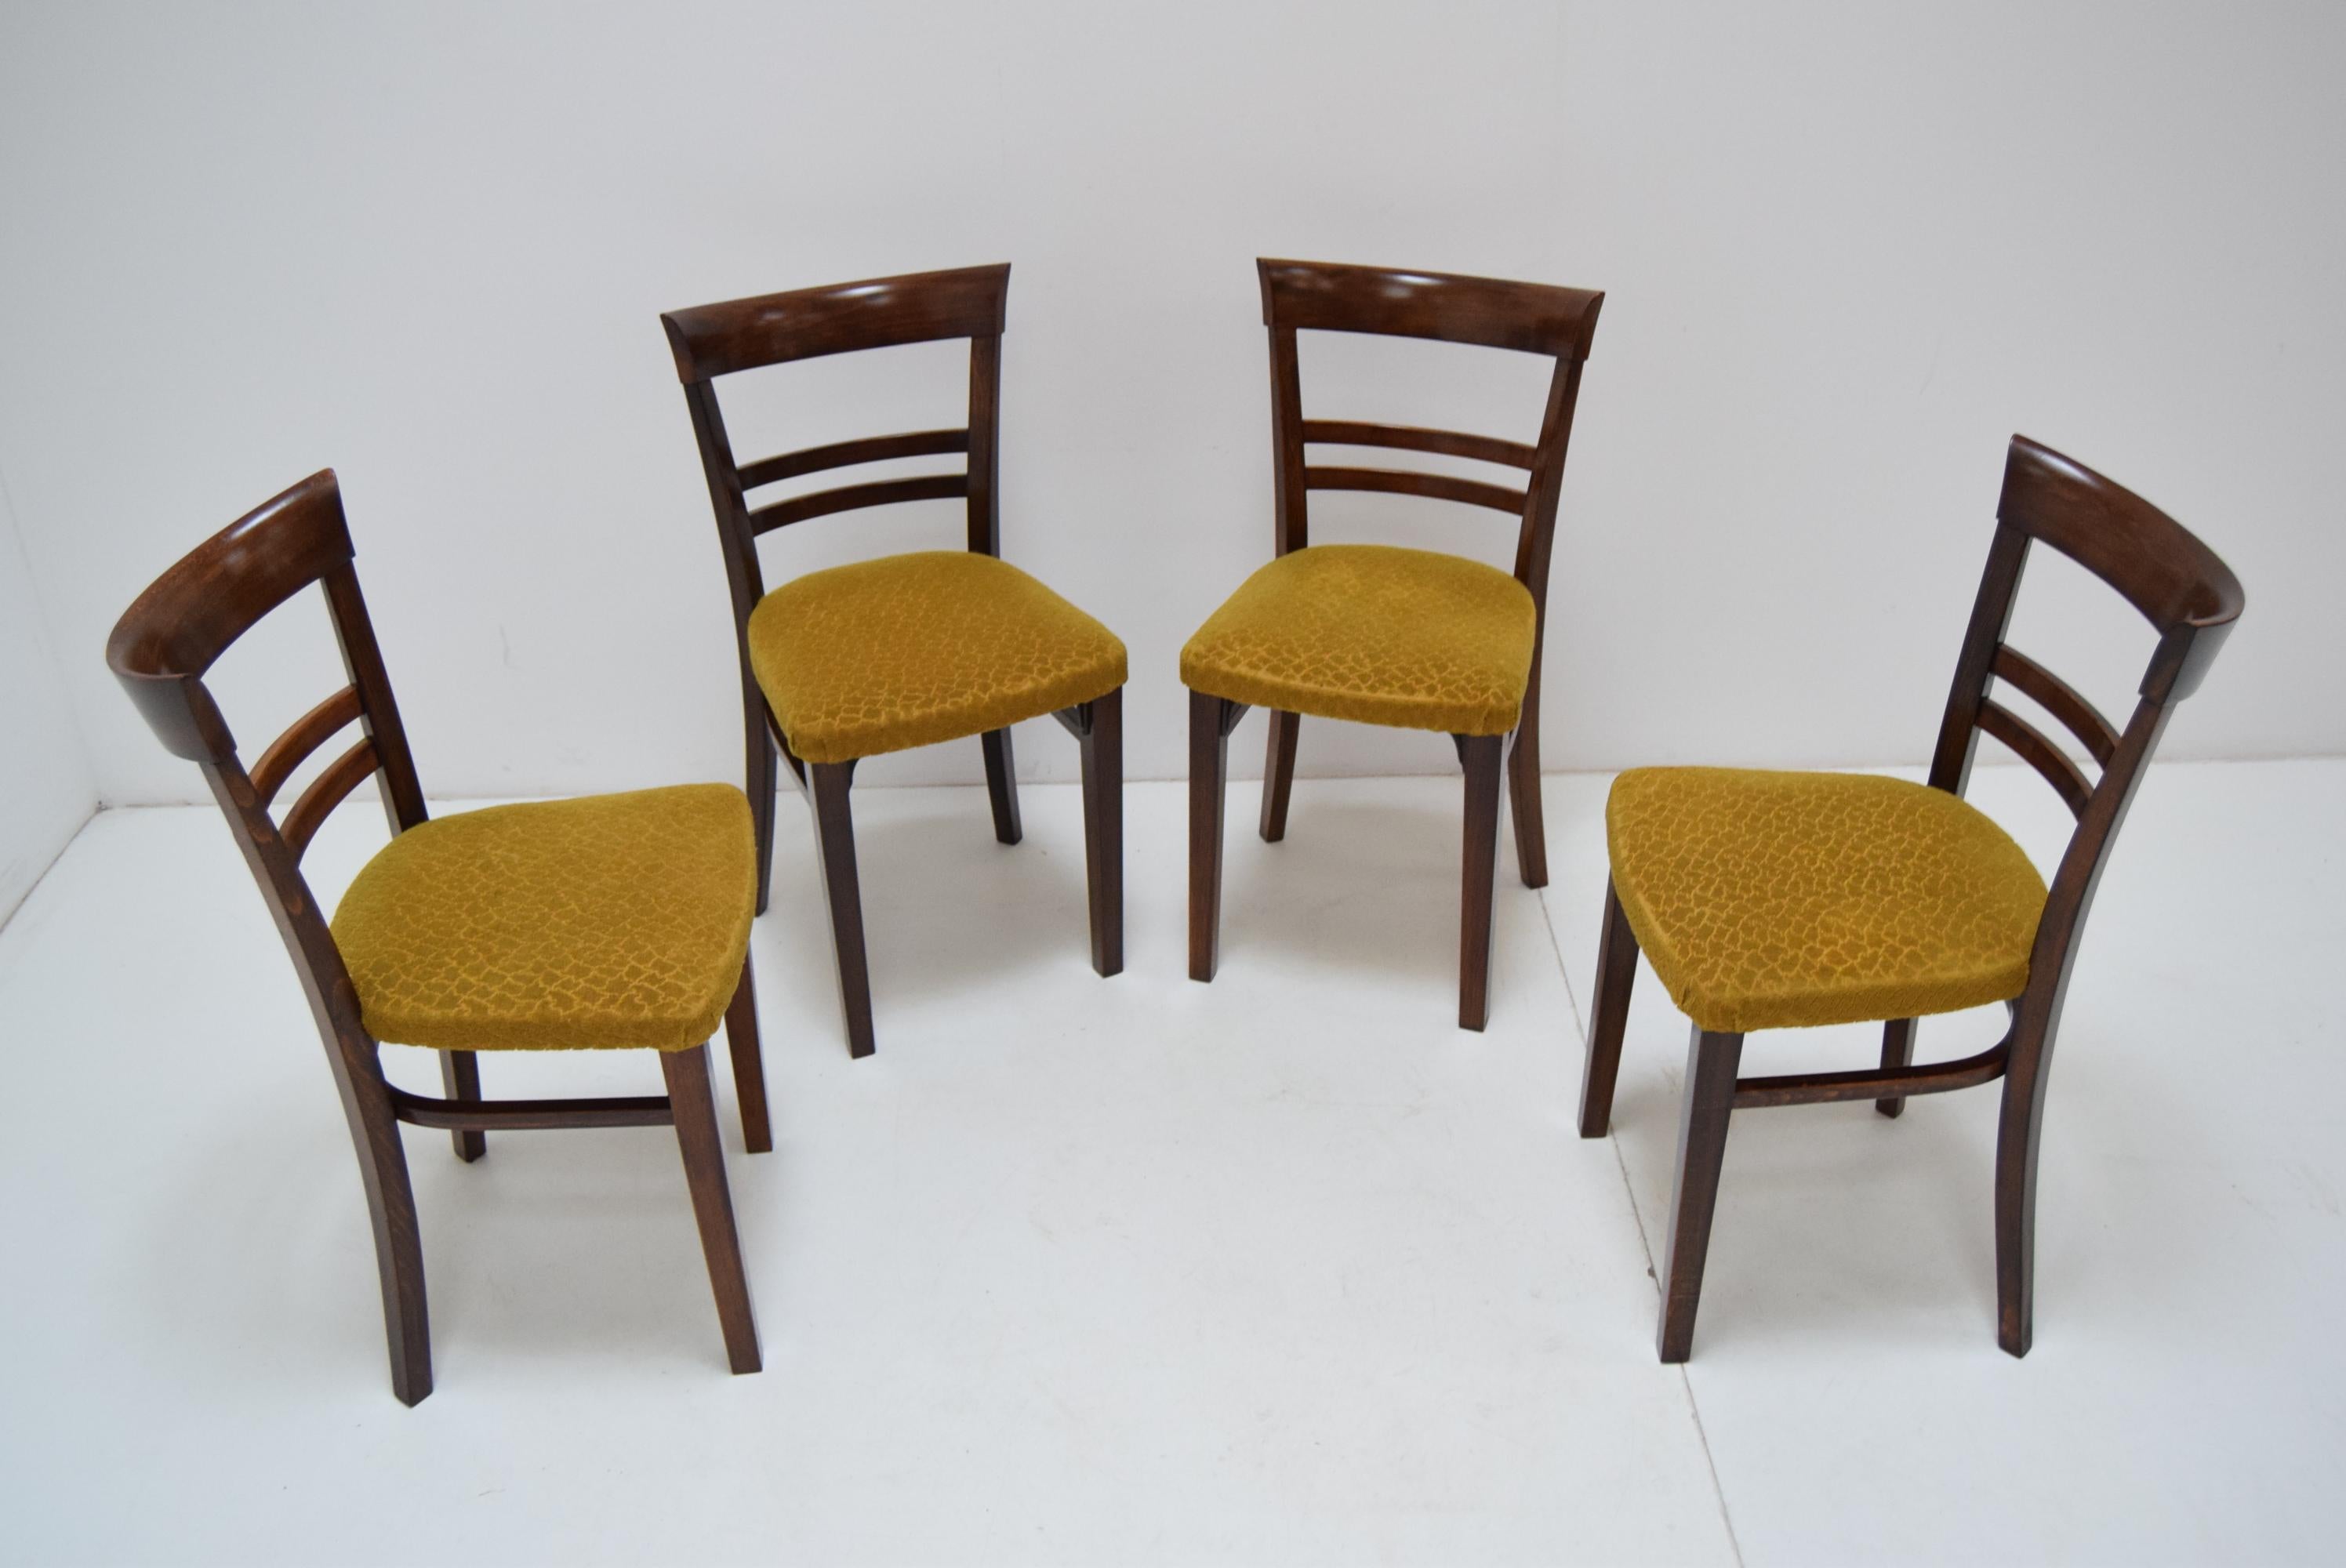 Made in Czechoslovakia
Made of wood, fabric
Upholstery has signs of use
Original condition.